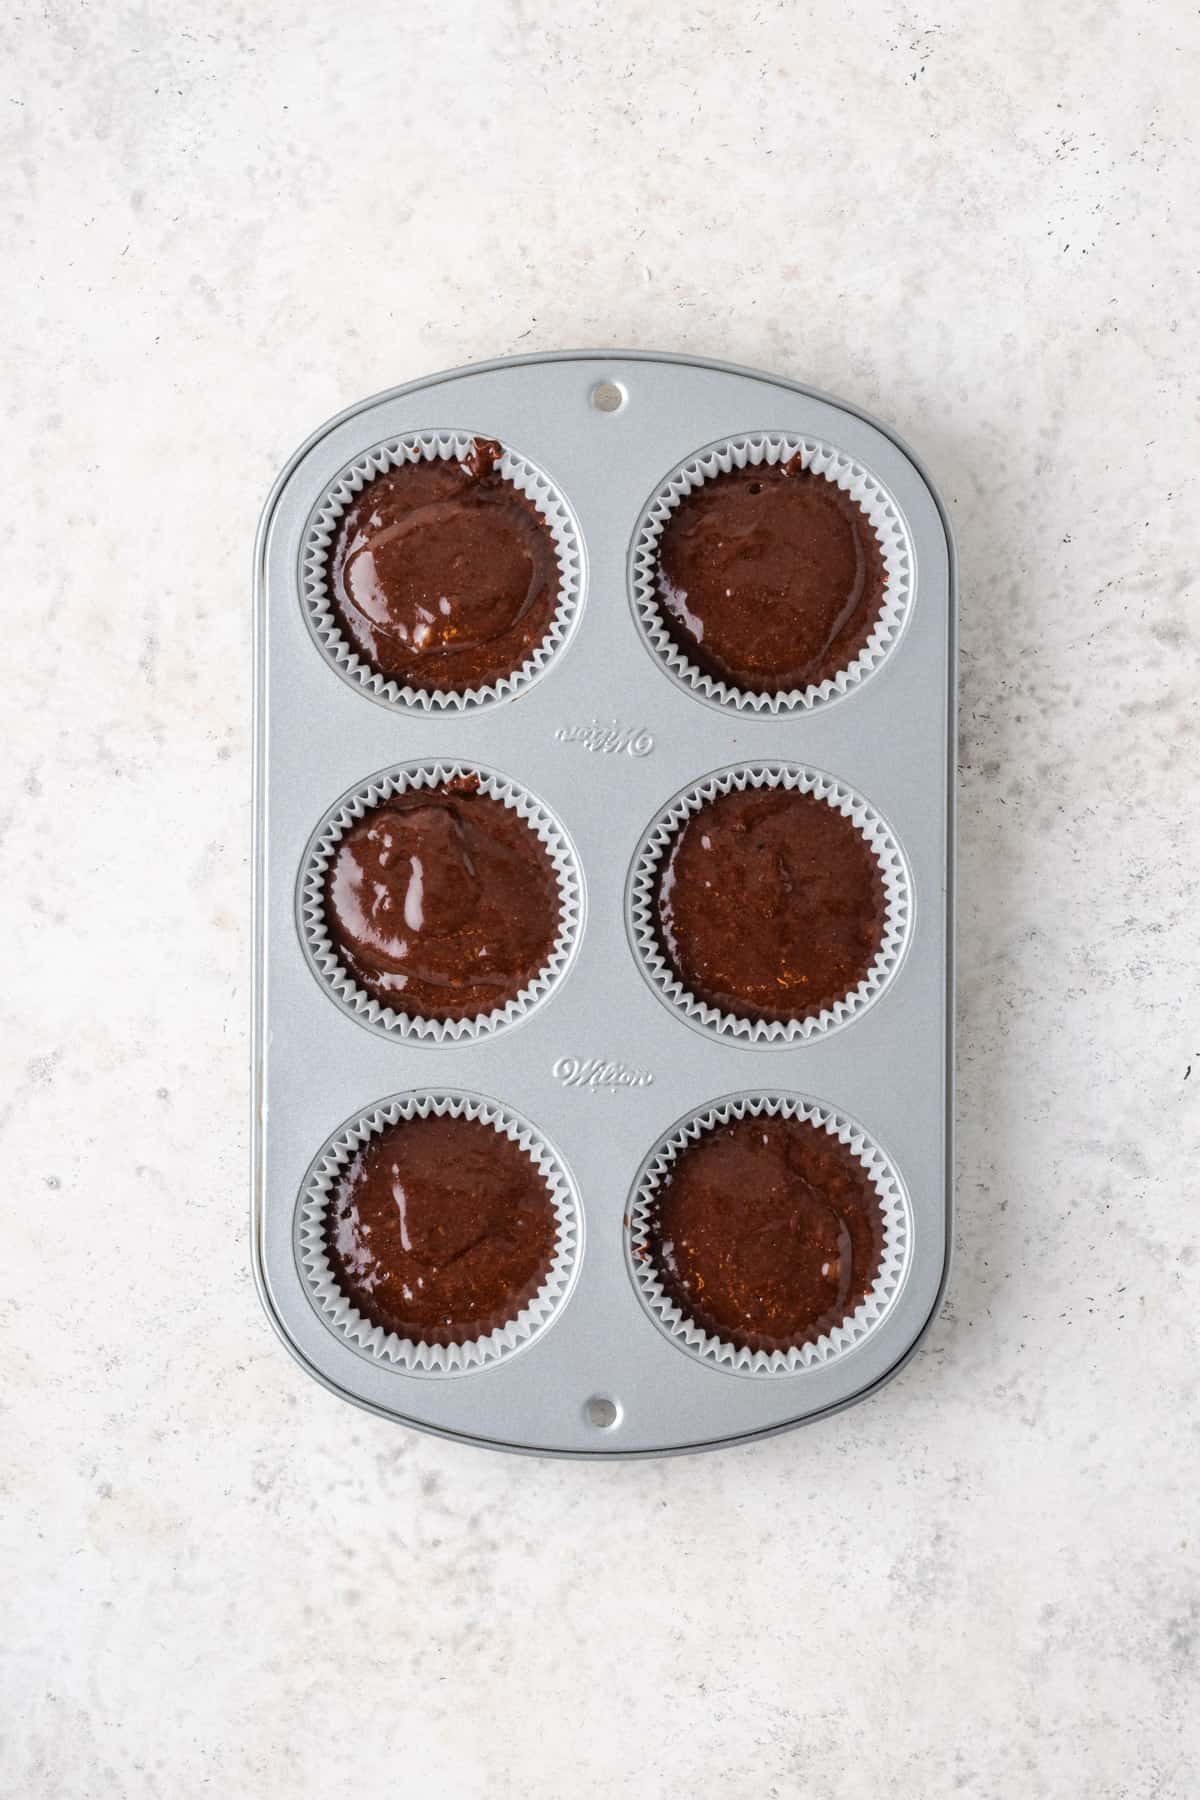 A 6-cup muffin pan filled with chocolate cupcake batter.